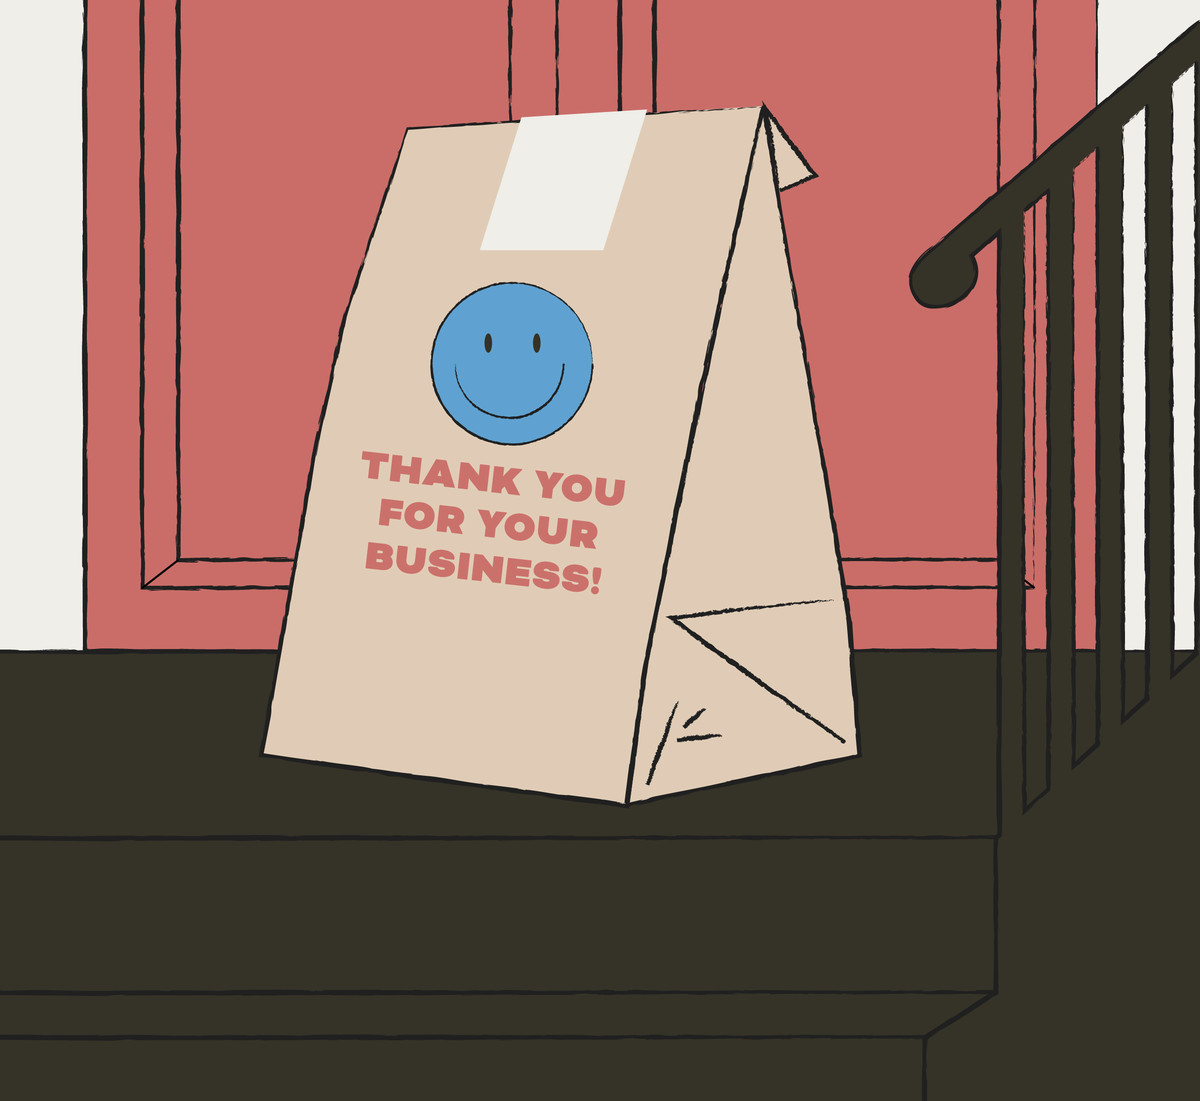 An illustration of a paper takeout bag with a blue smiley face on it; with text that reads “Thank you for your business!”